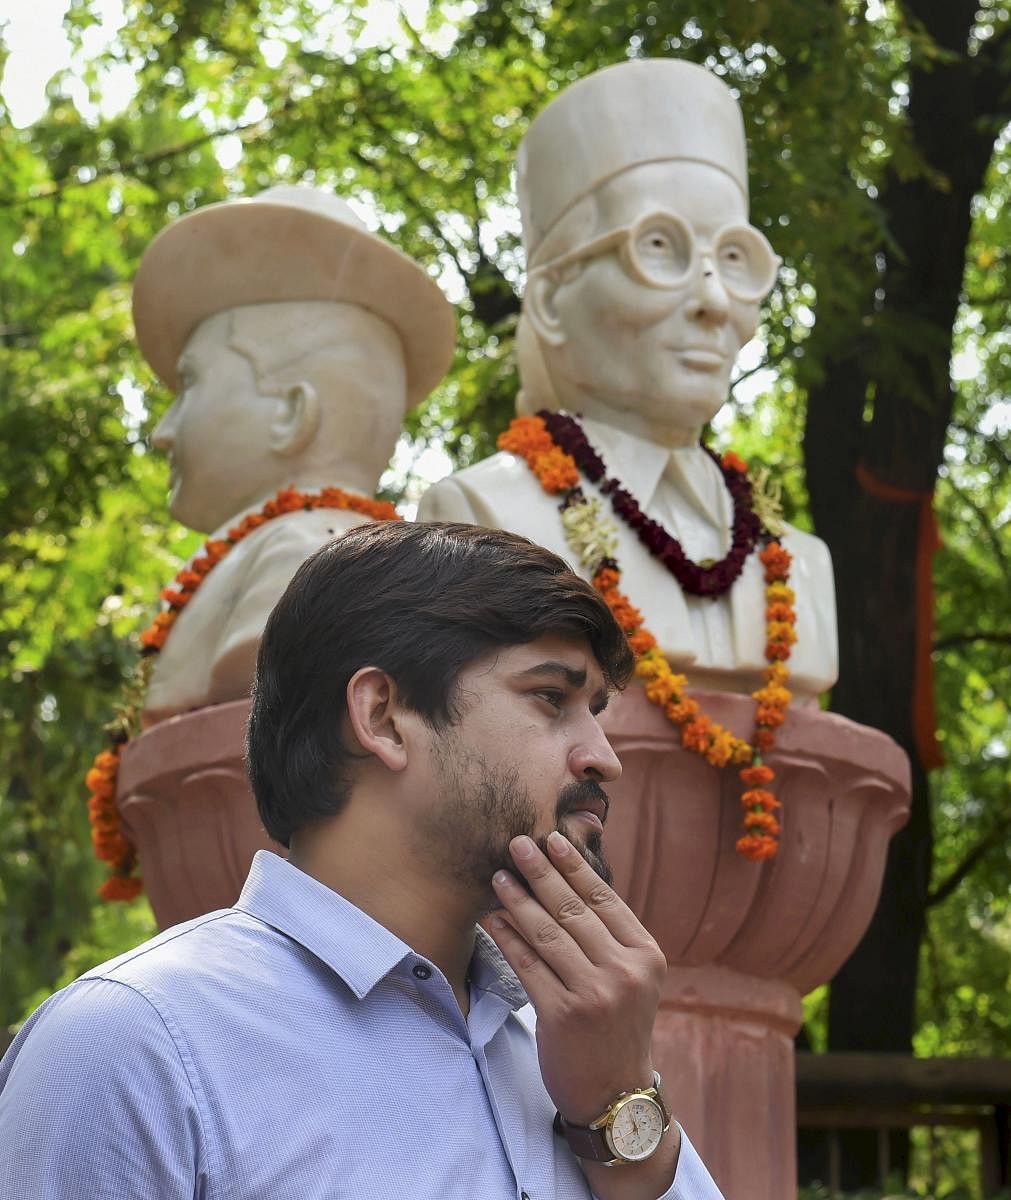 Delhi University Students' Union (DUSU) president Shakti Singh stands next to the busts of Veer Savarkar, Subhash Chandra Bose, and Bhagat Singh which were installed outside the Arts Faculty of the University, in New Delhi. (PTI Photo)